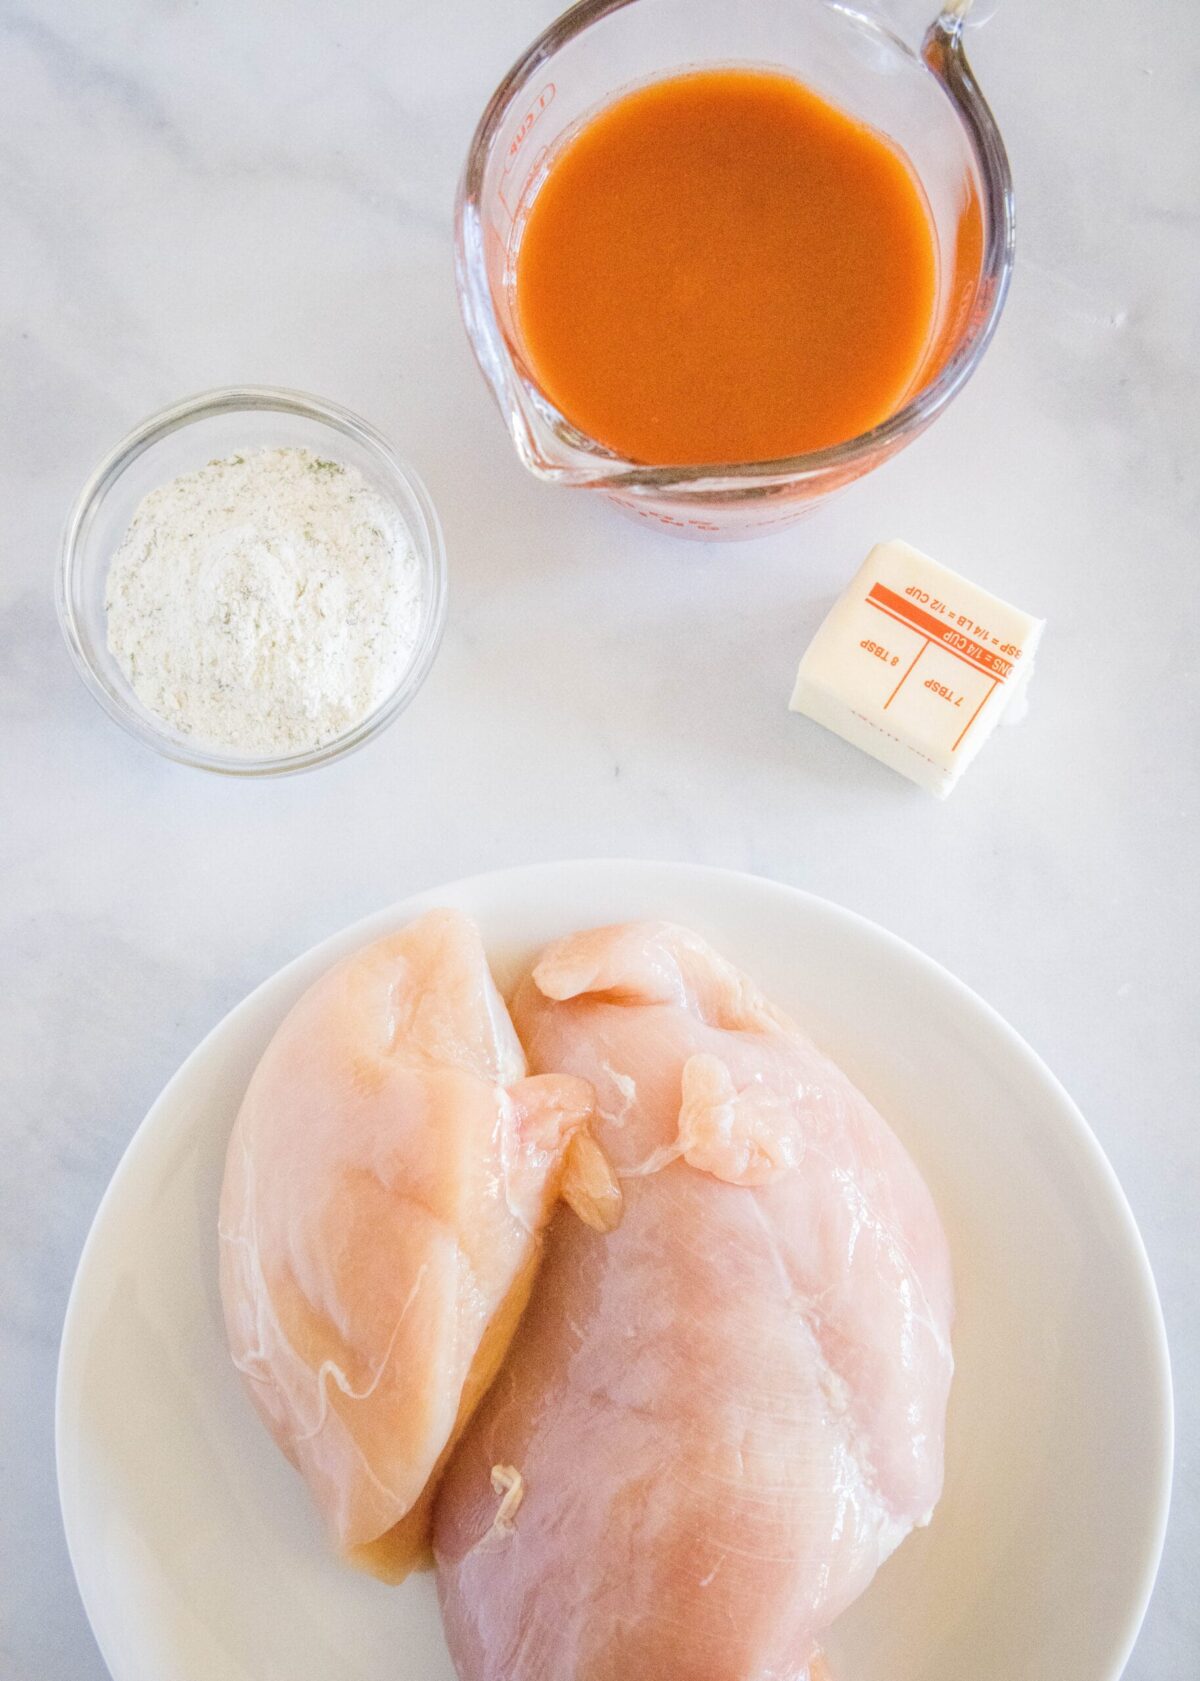 Overhead view of a knob of butter, a plate of raw chicken breasts, a ramekin of ranch dressing mix, and a pyrex of buffalo sauce